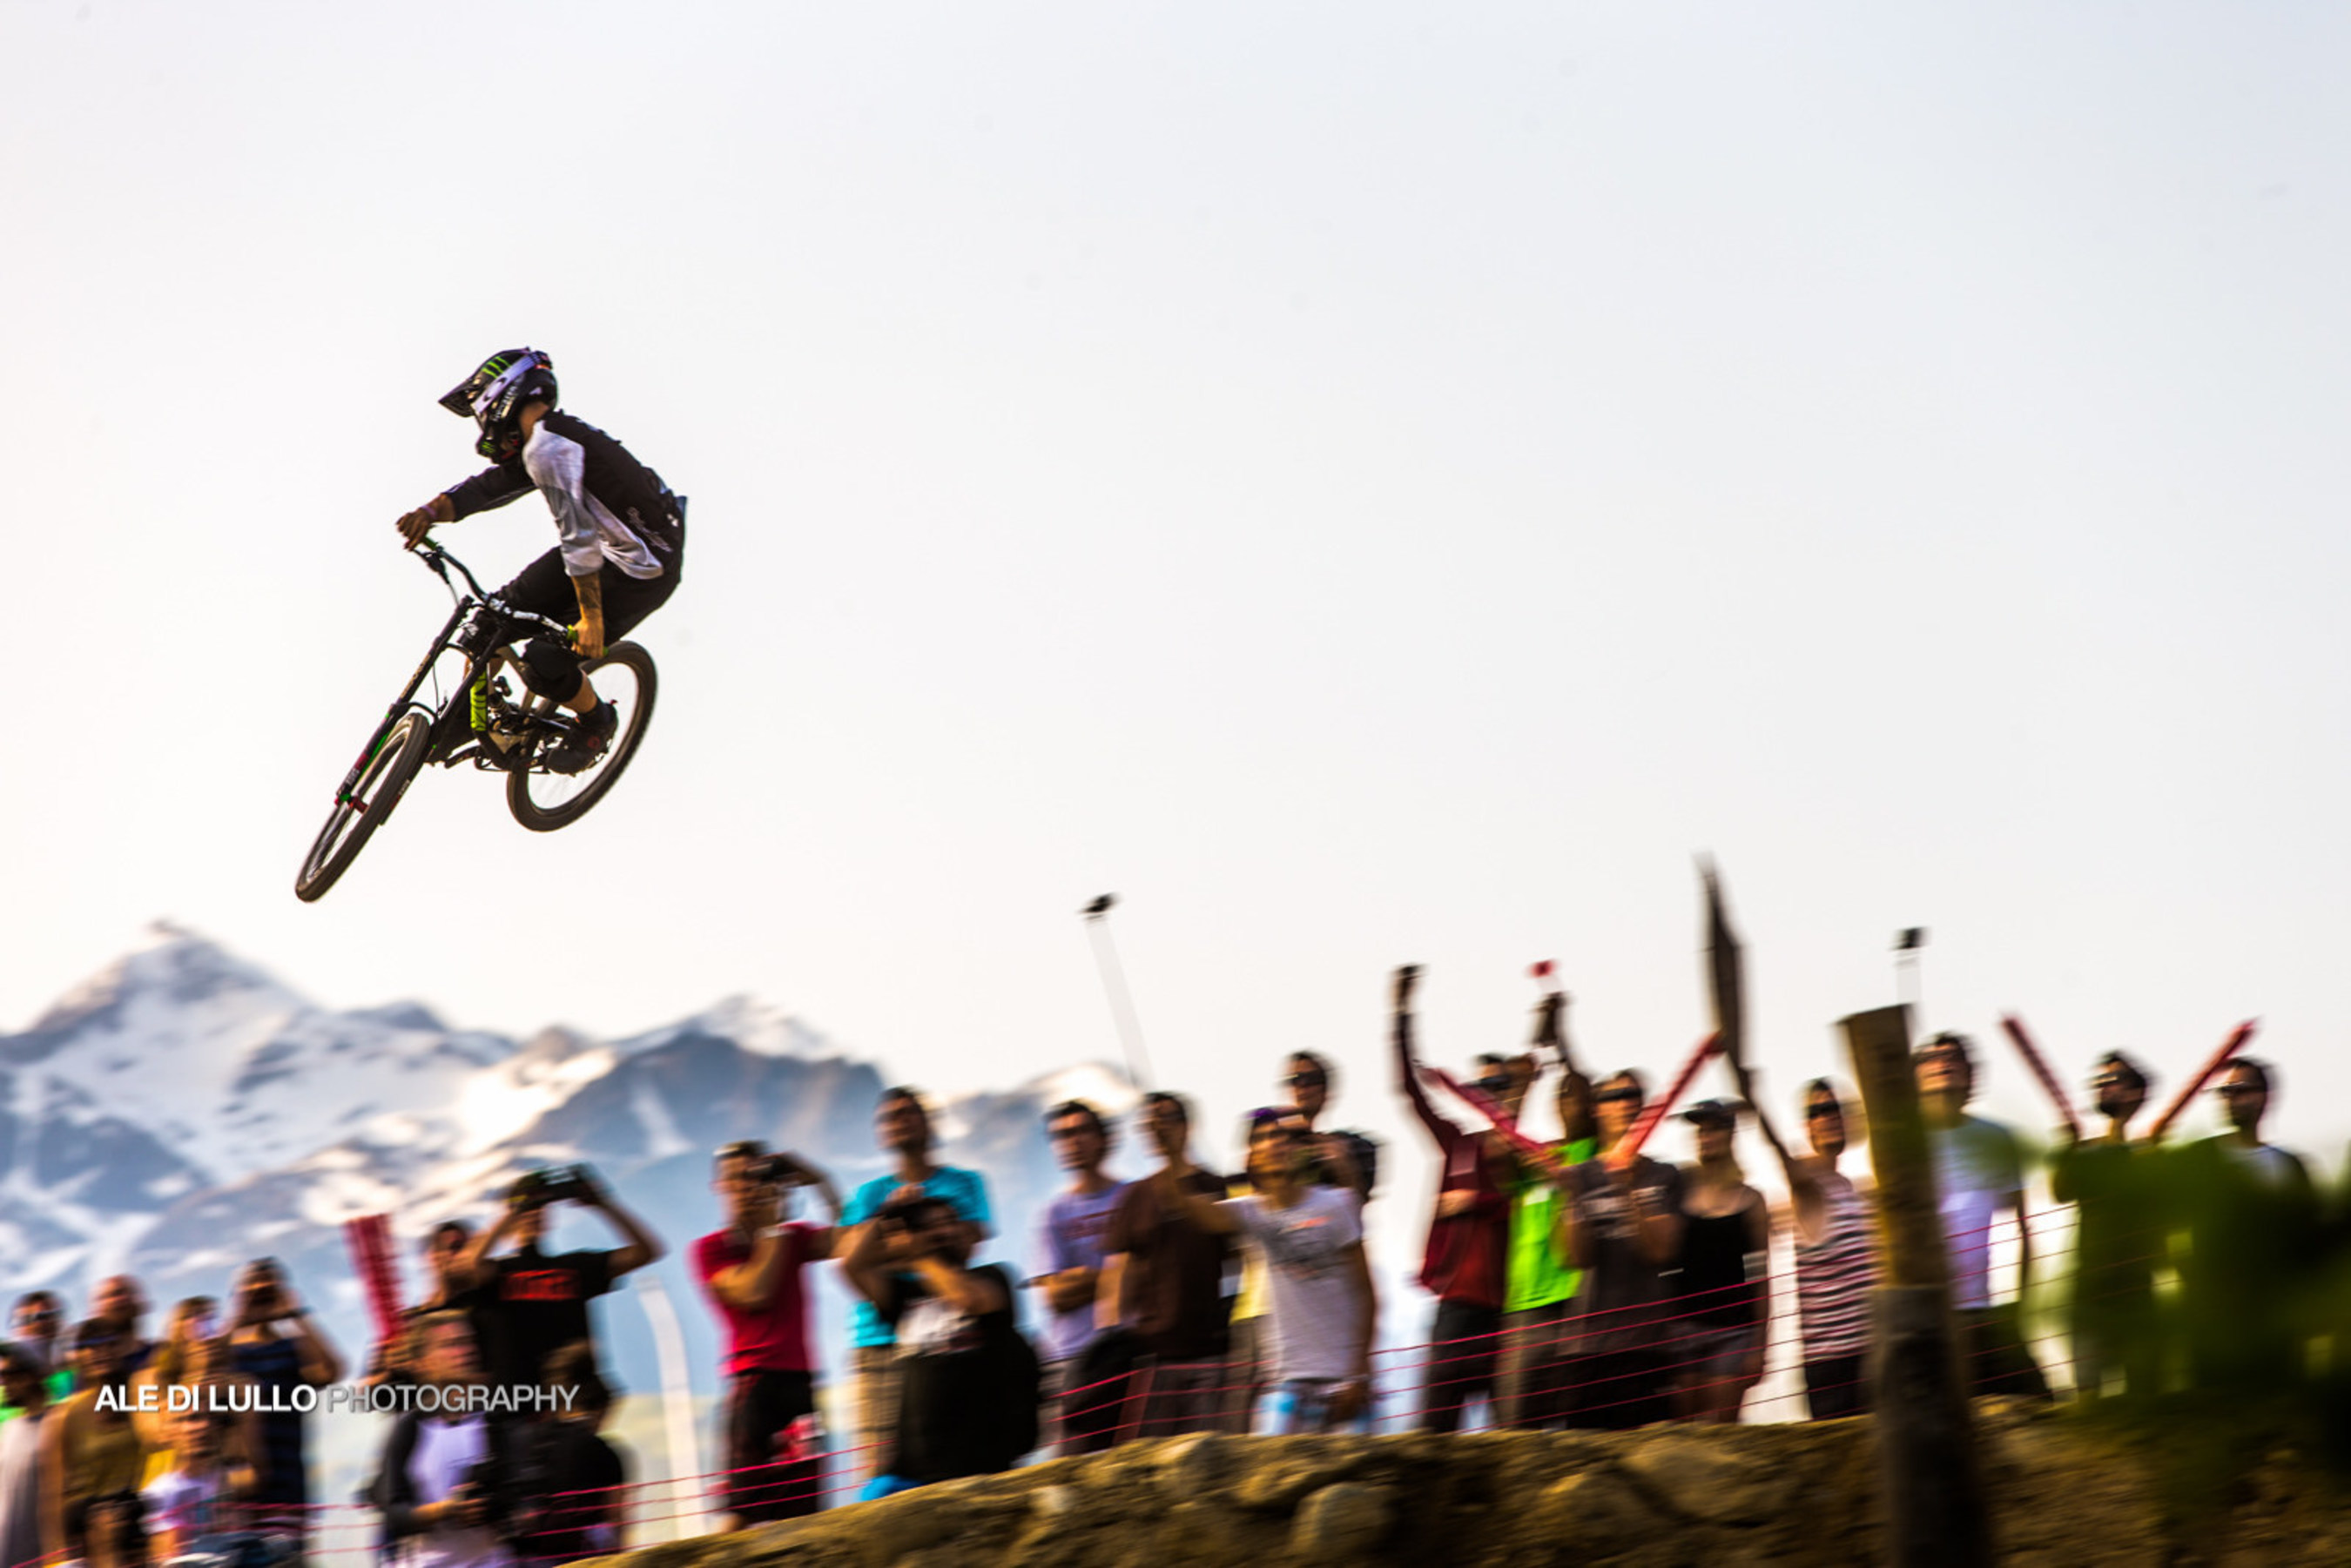 LifeProof welcomes Cam Zink as it's newest member to the LifeProof athlete team.